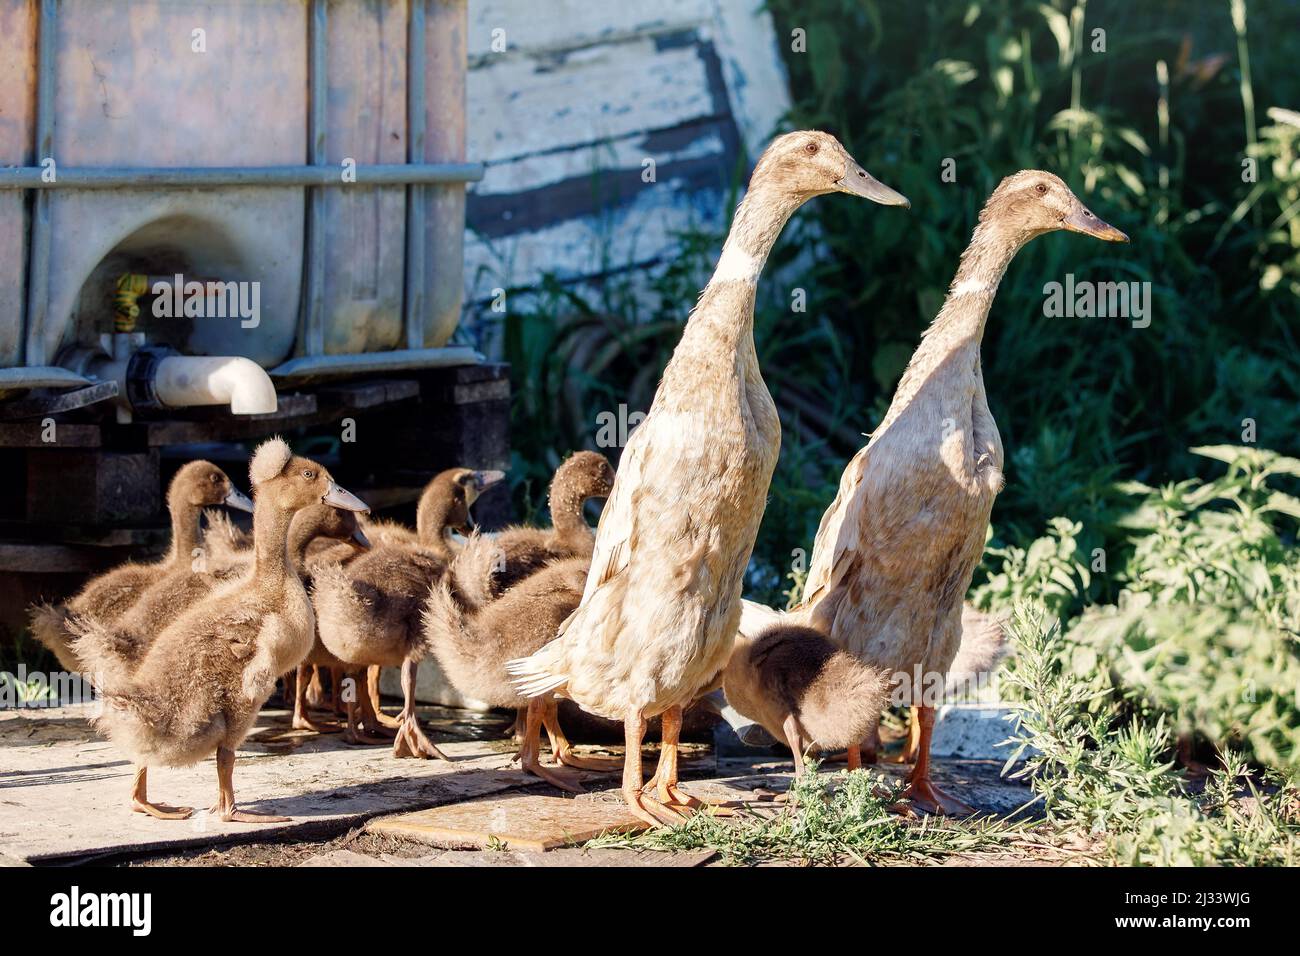 Two Indian runner ducks with ducklings came to drink water and take bath near a garden watering place. Stock Photo